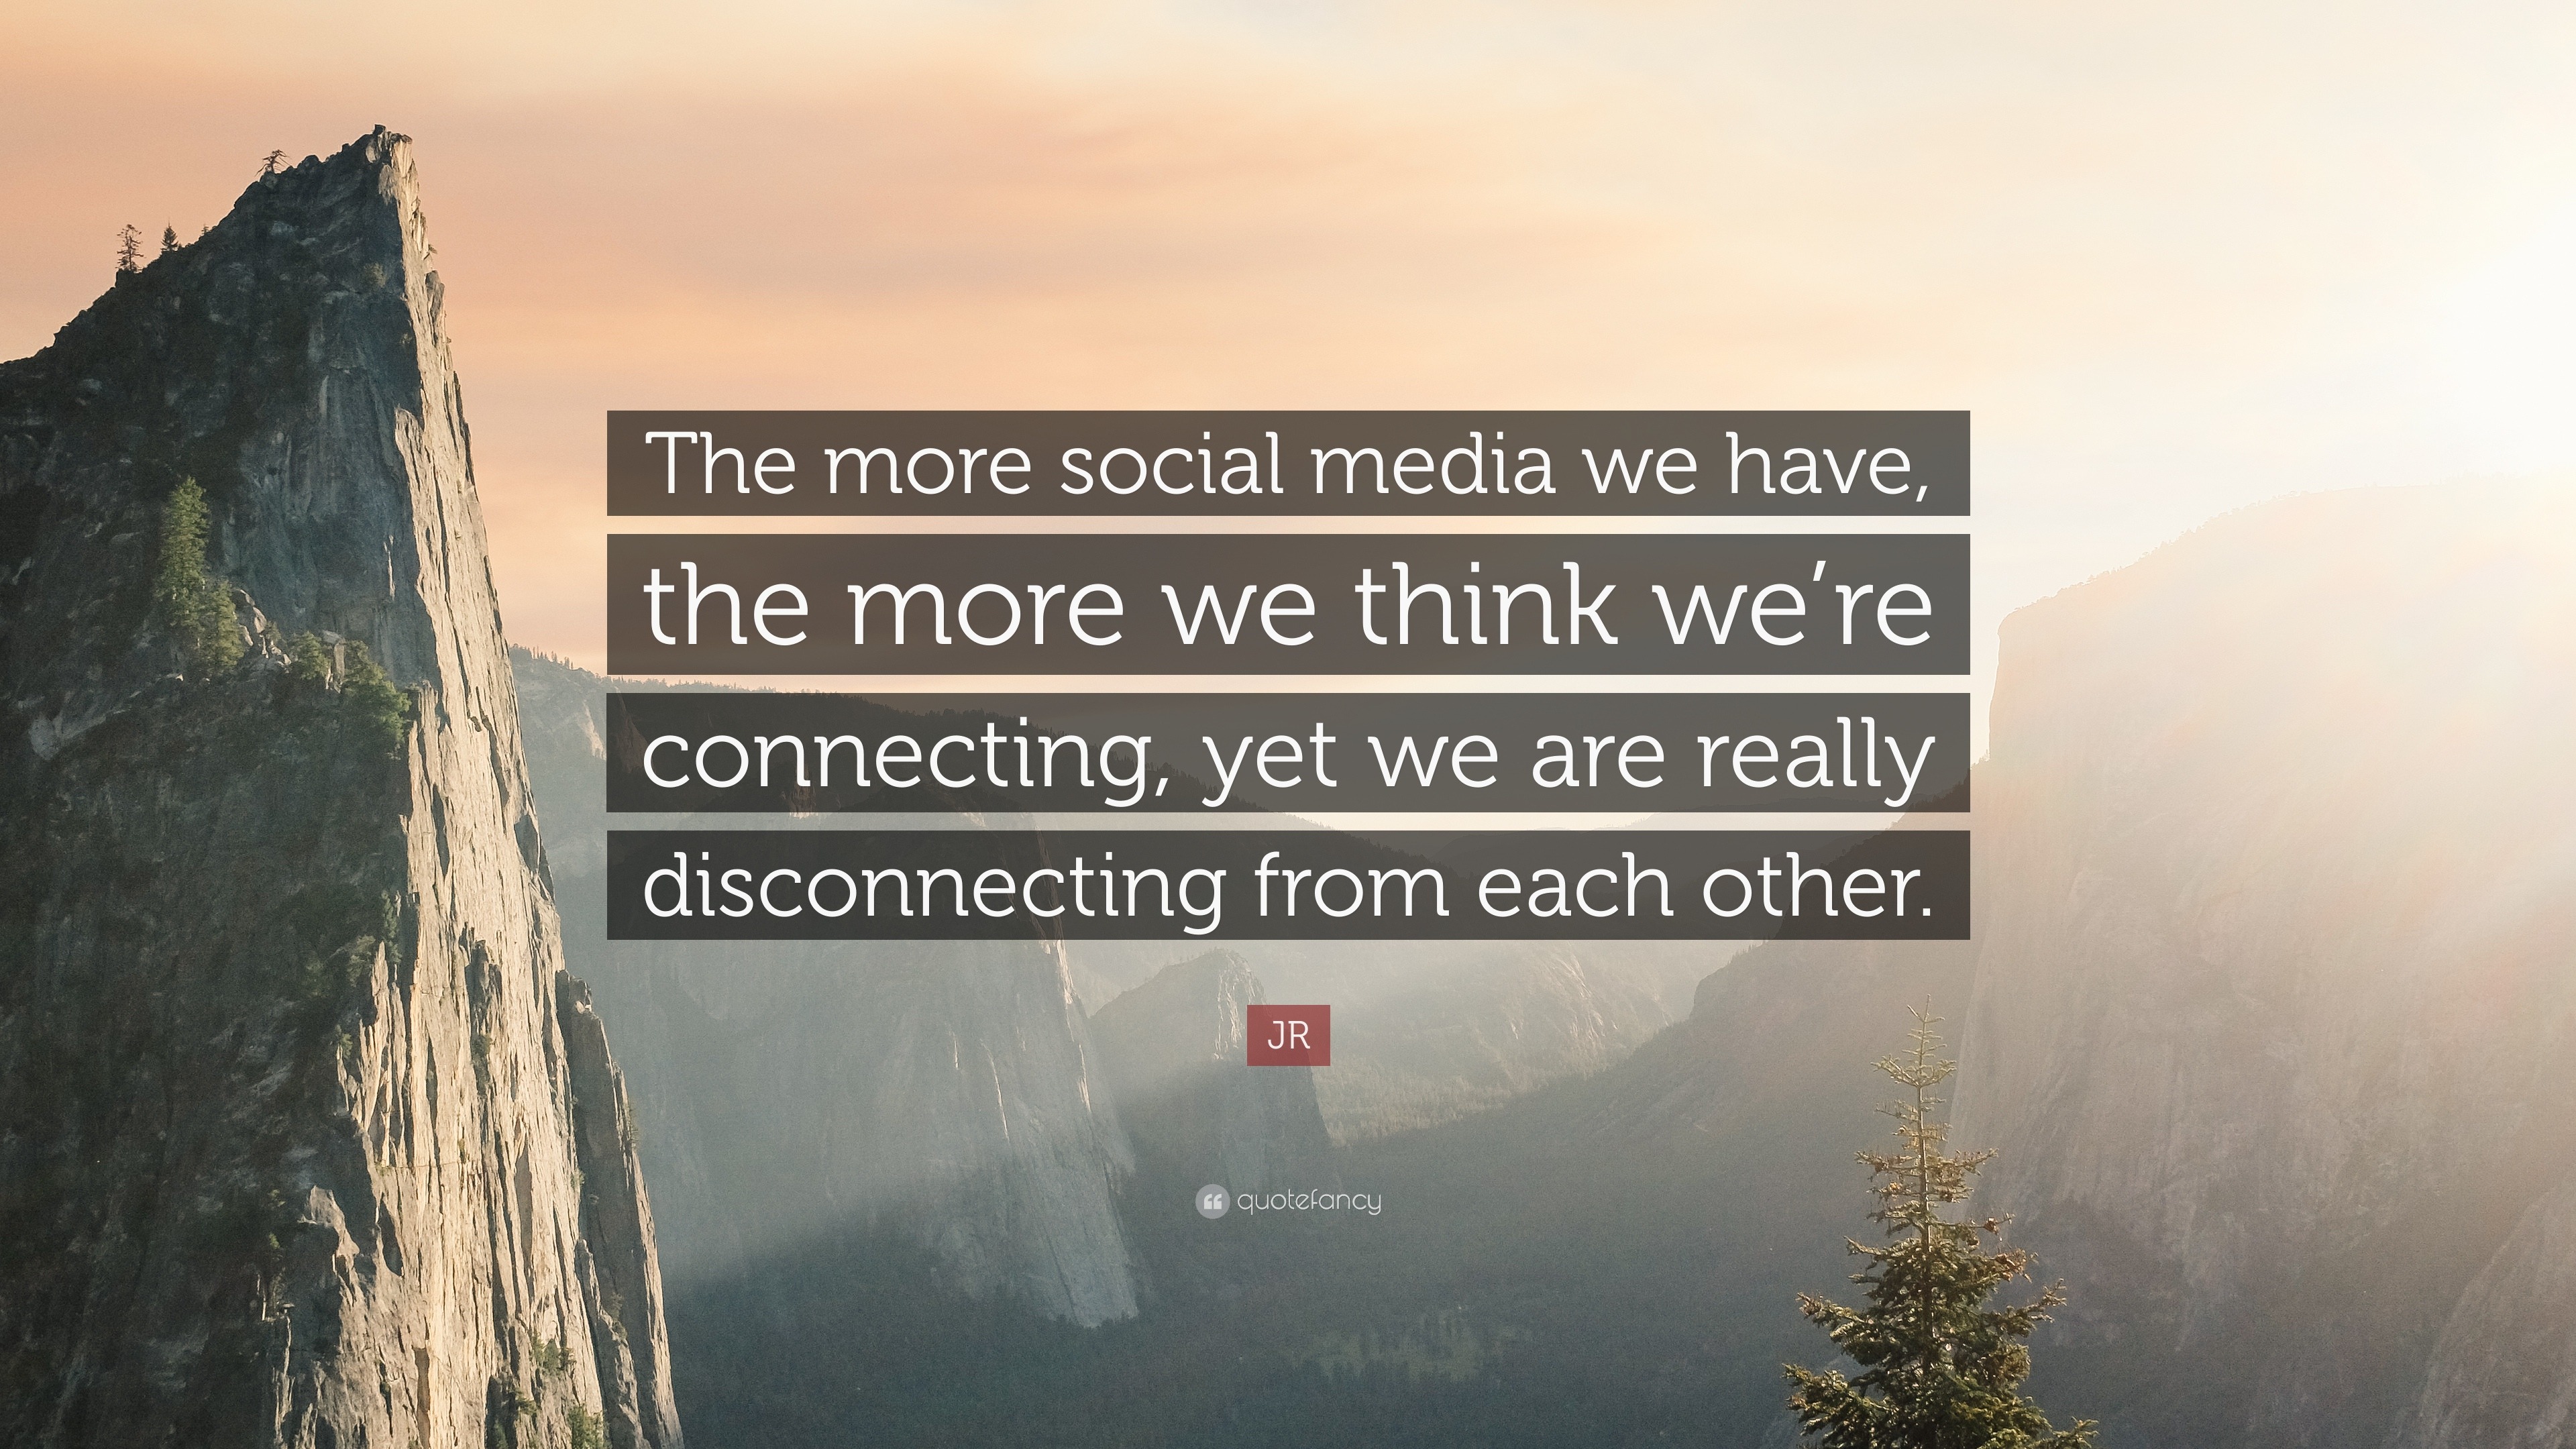 social think re each disconnecting connecting yet really quote jr wallpapers quotefancy